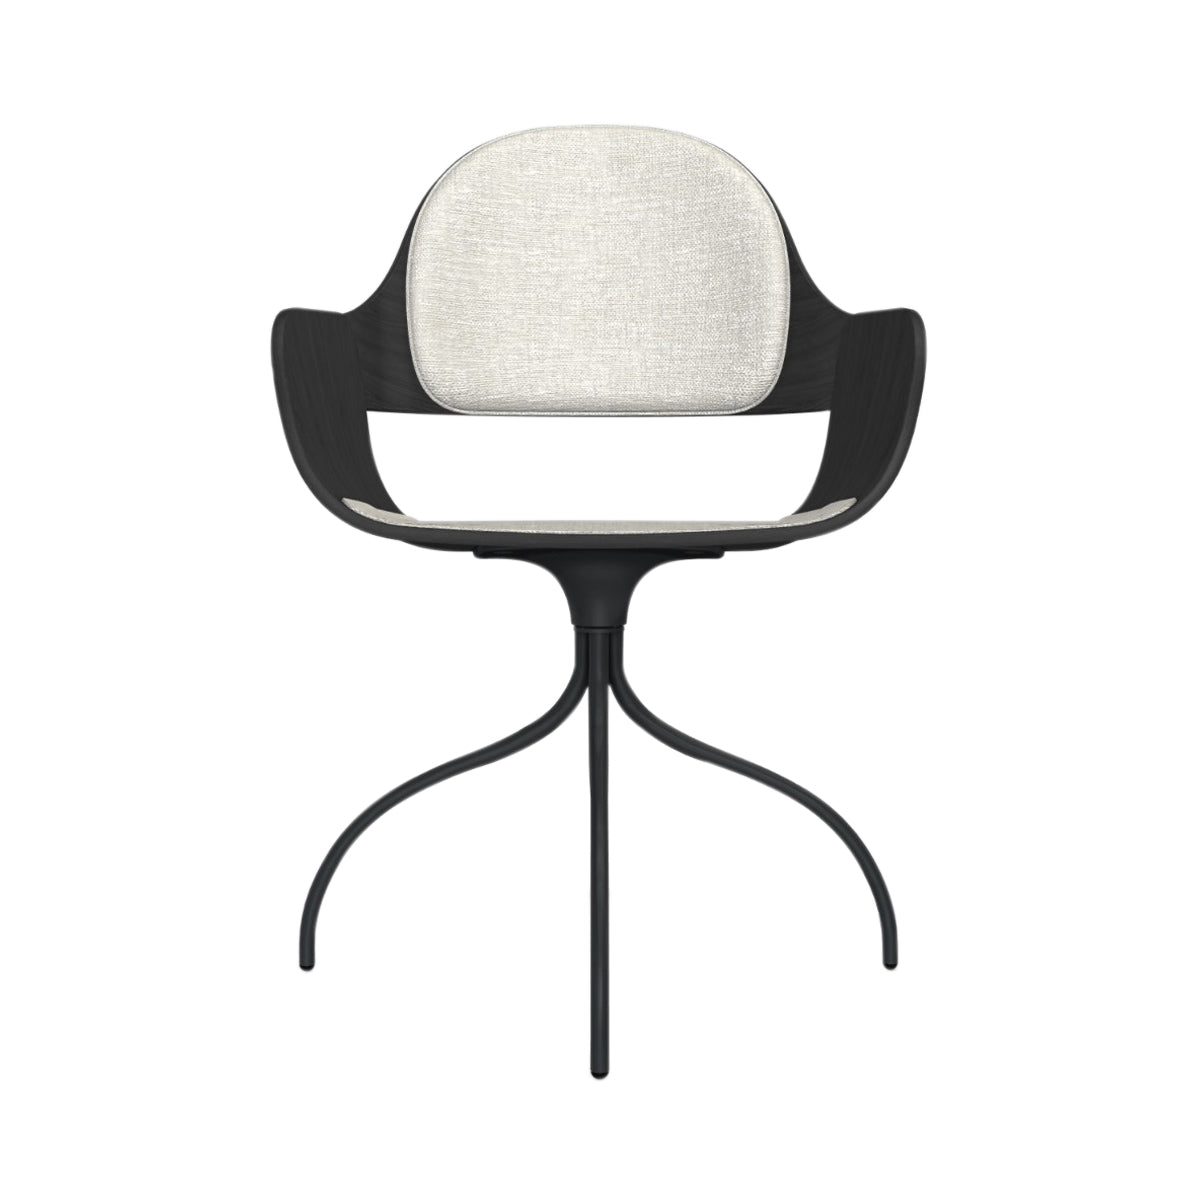 Showtime Nude Chair with Swivel Base: Seat + Backrest Cushion + Ash Stained Black + Anthracite Grey